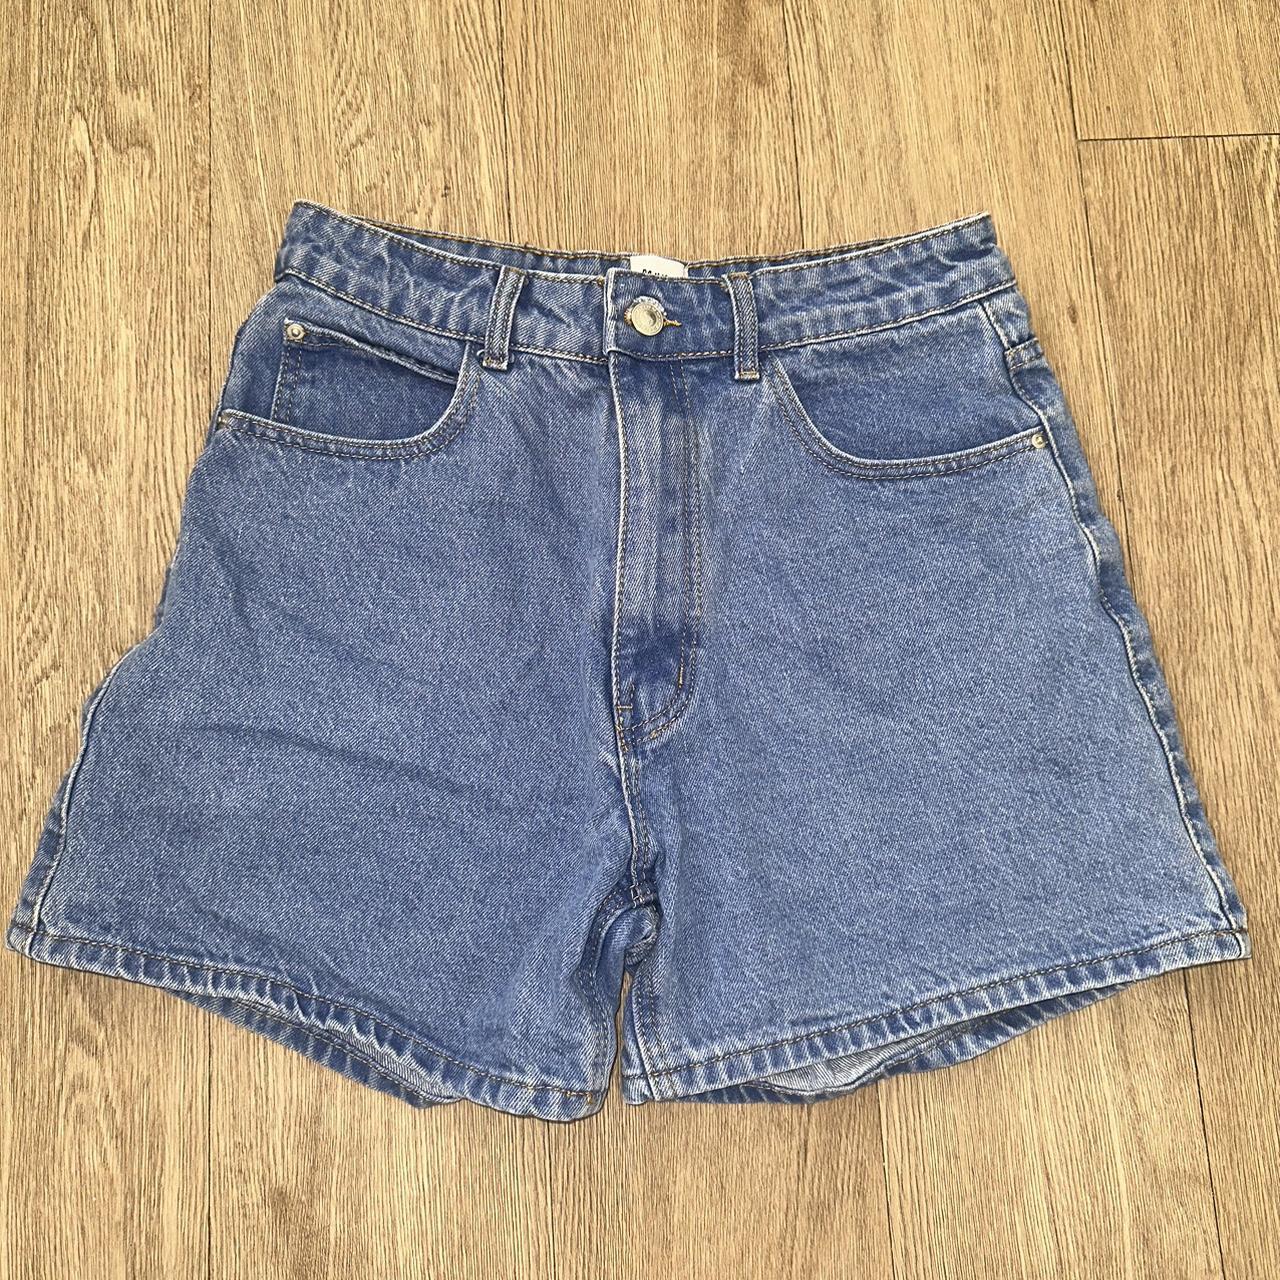 Princess Polly Denim Shorts Size 6. Great condition,... - Depop